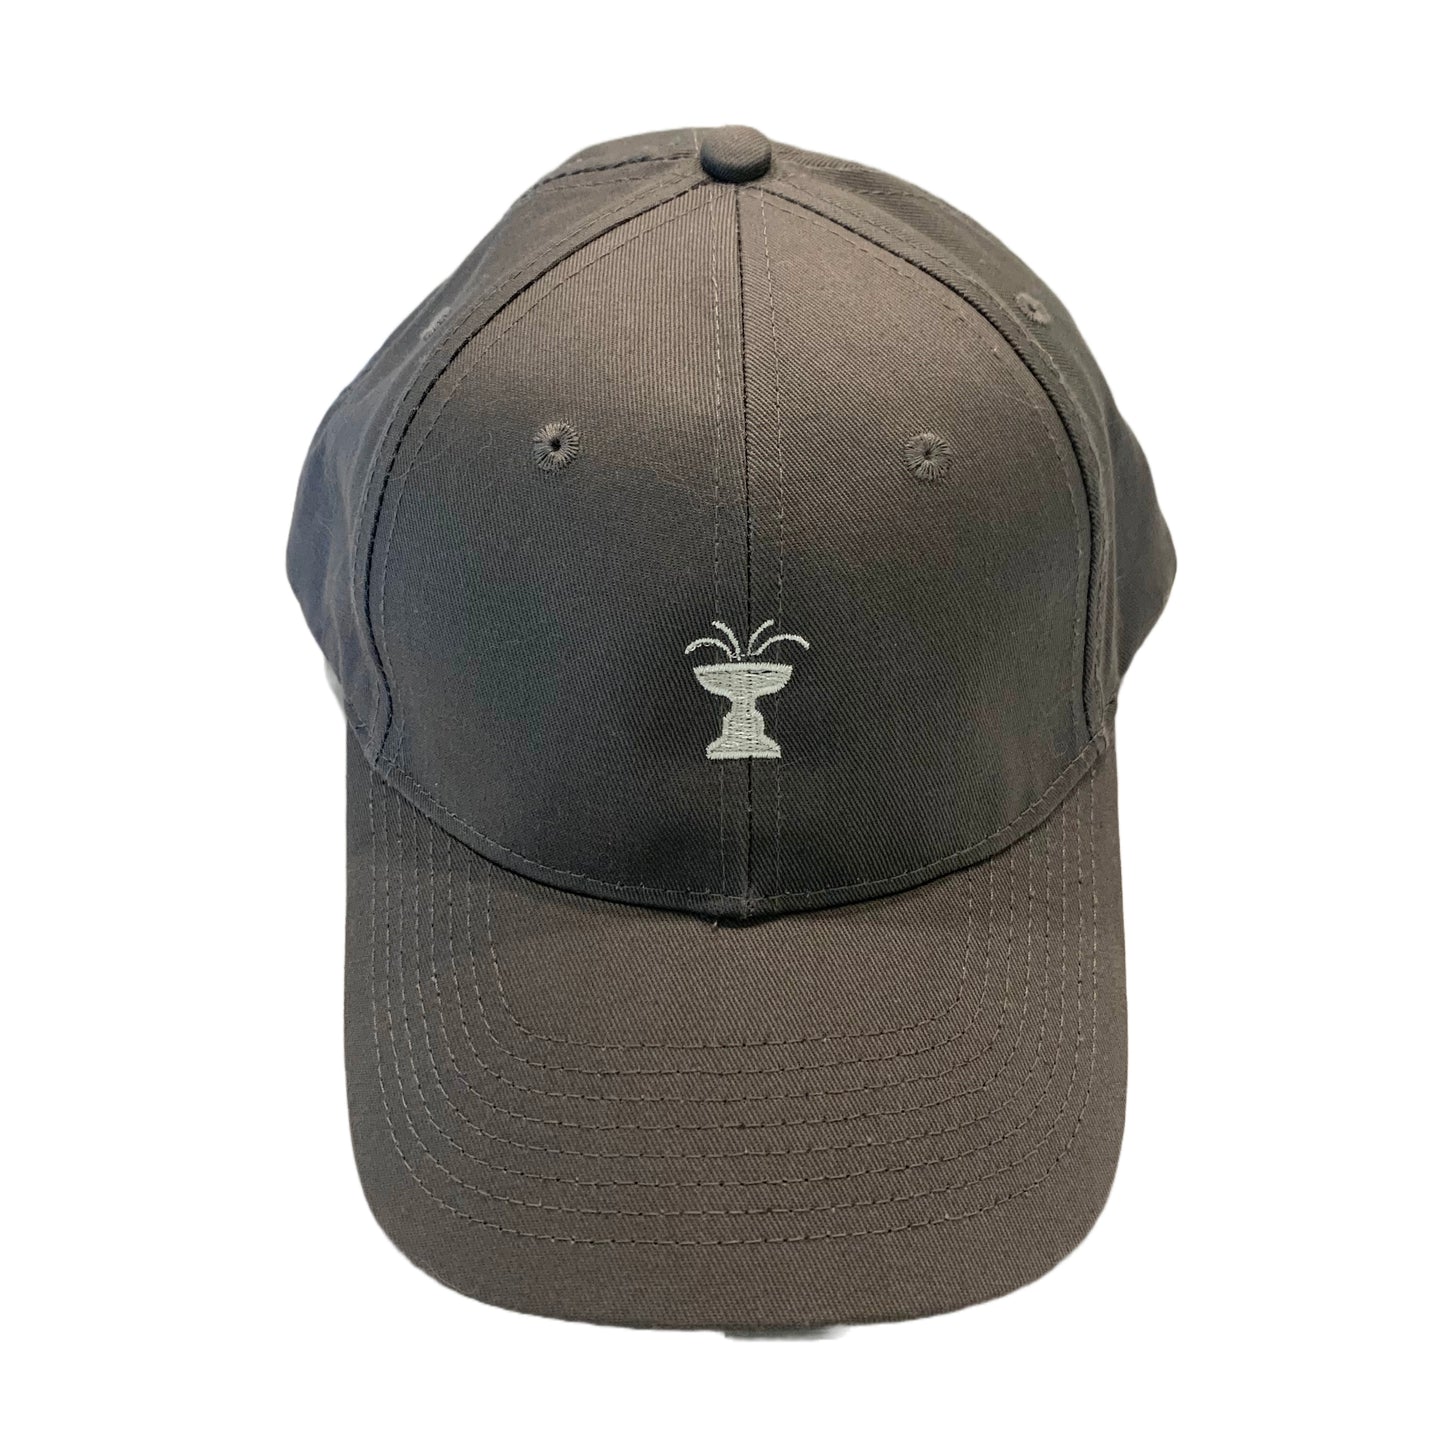 Iconic Ridgefield Fountain Baseball Cap in Structured Cotton